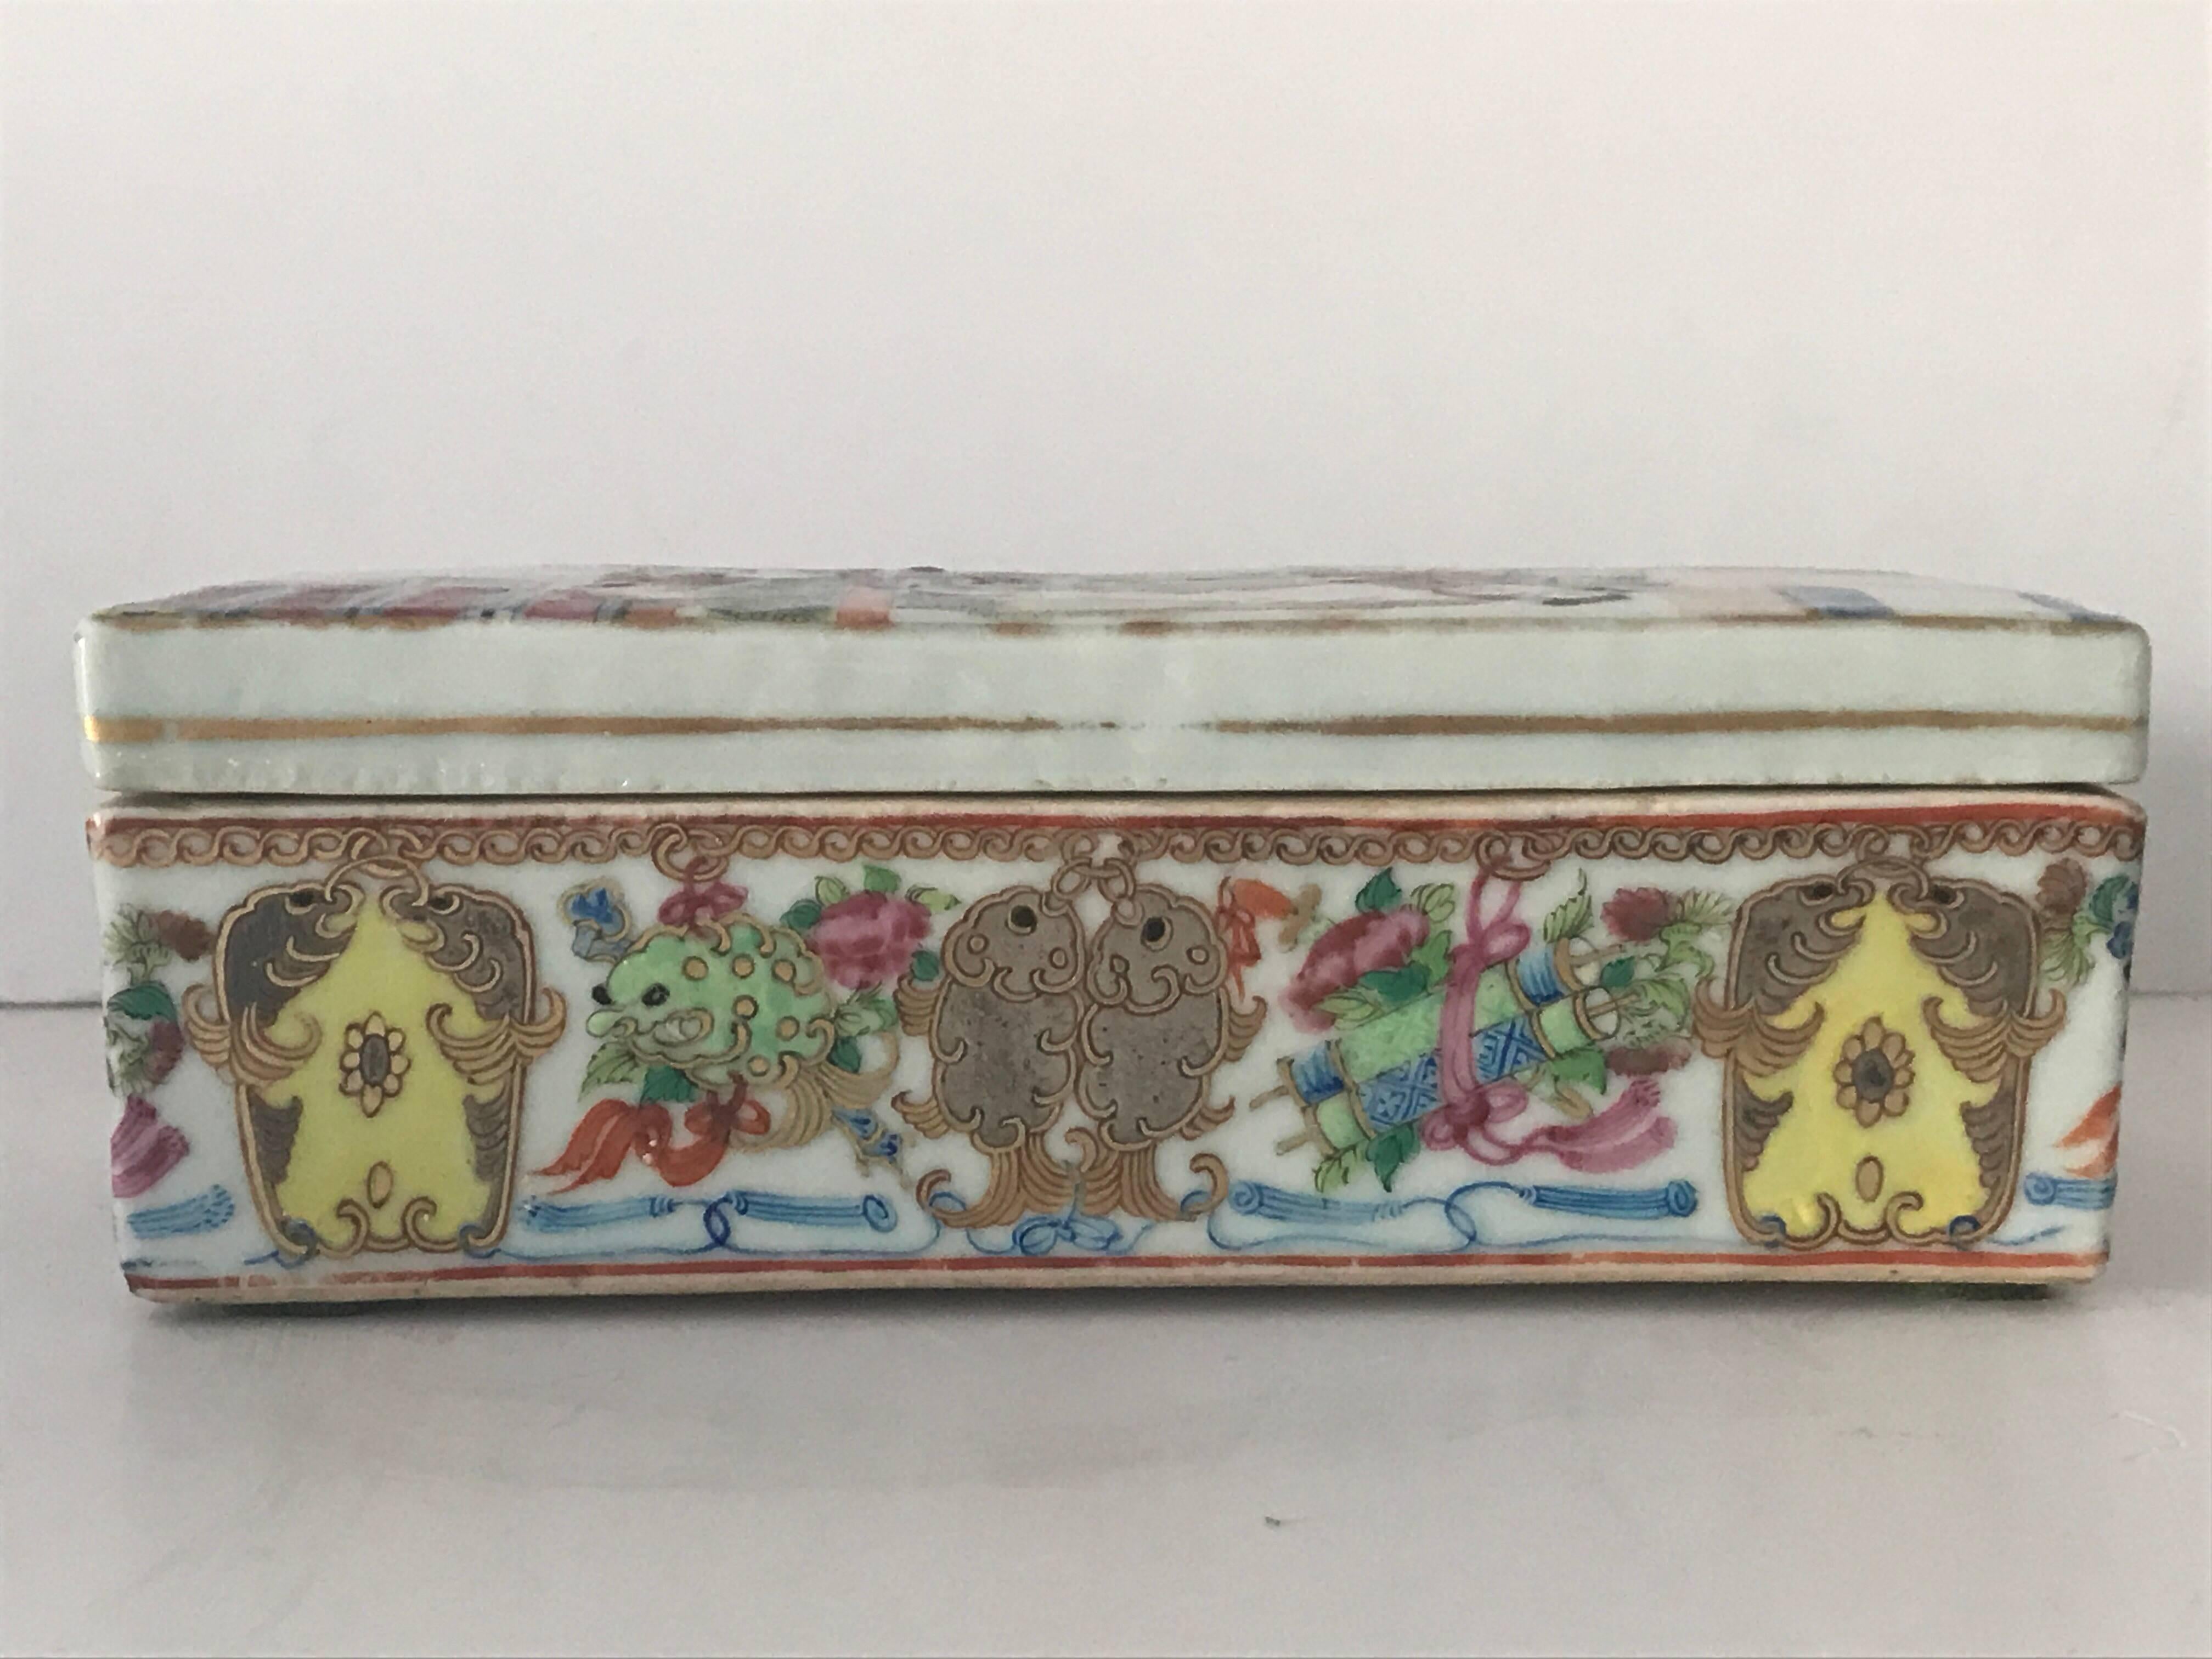 Chinese Daoguang Reign Famille Rose Box with Cover.
A beautiful and very nice famille rose box with cover, depicting a court or garden scene with ladies on the lid. Among the sides there are Buddhist symbols depicted and there are gilded details all